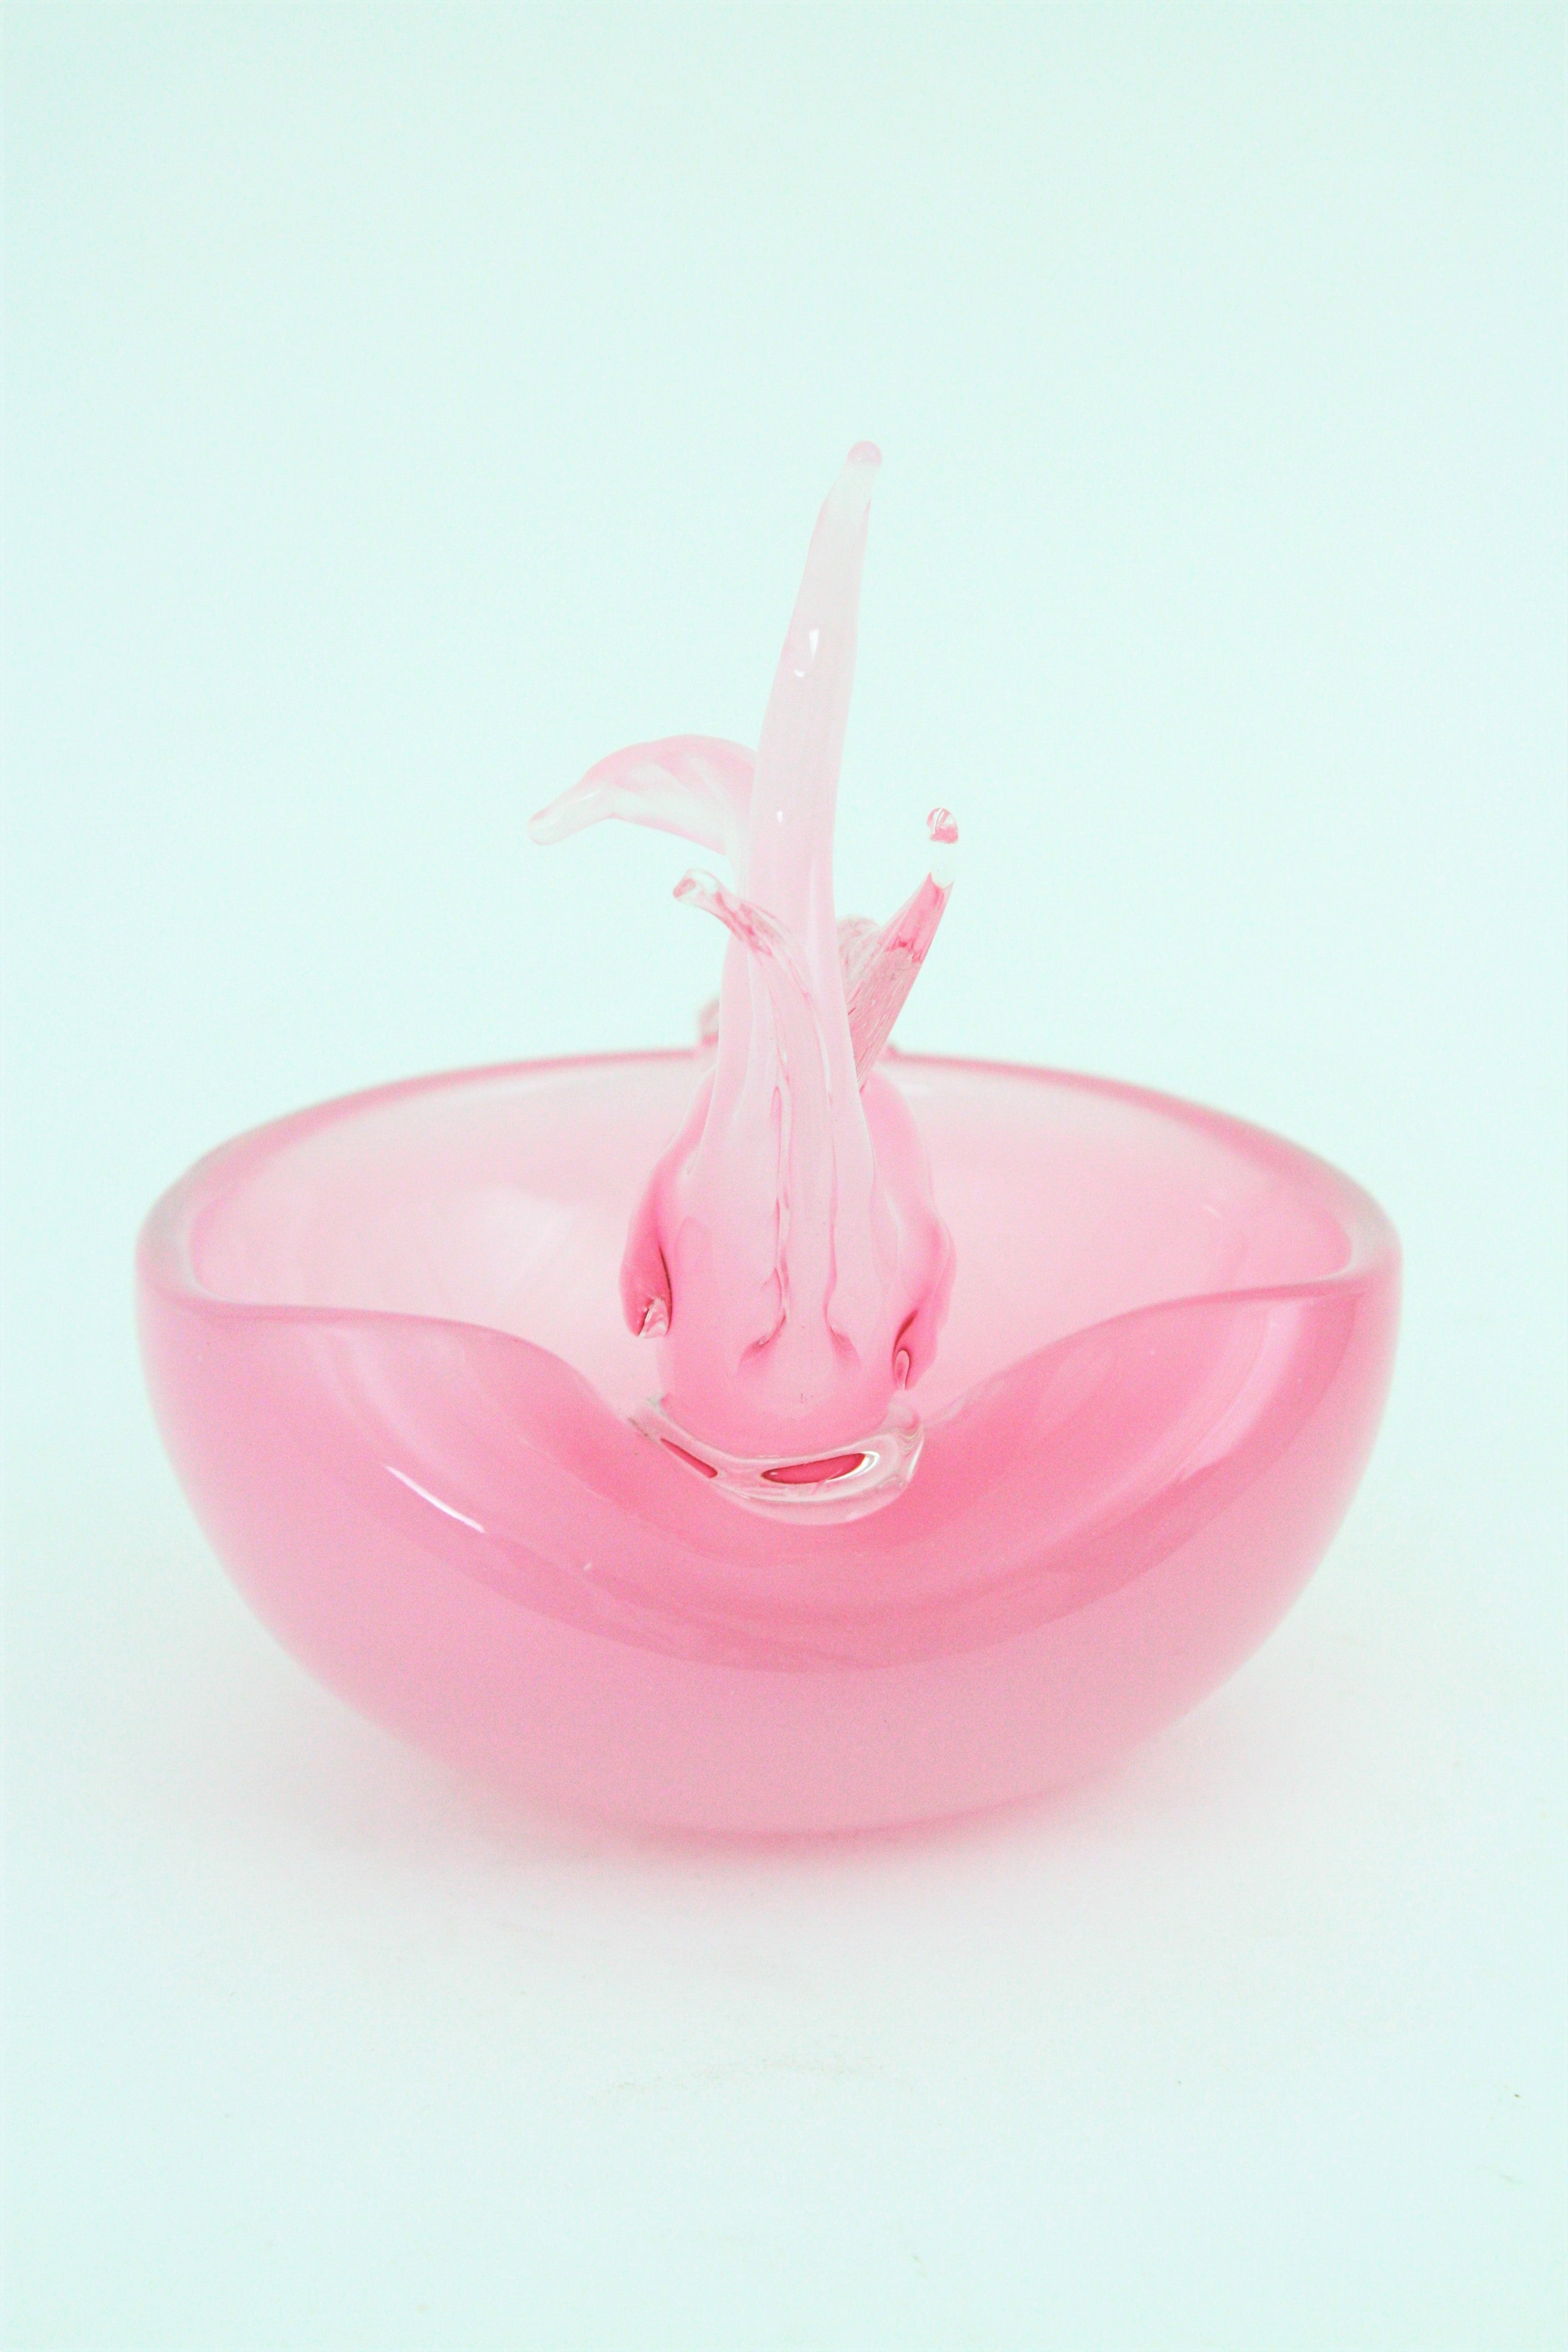 Mid-Century Modern Archimede Seguso Murano Opal Pink Alabastro Fish Bowl or Ashtray, Italy, 1950s For Sale